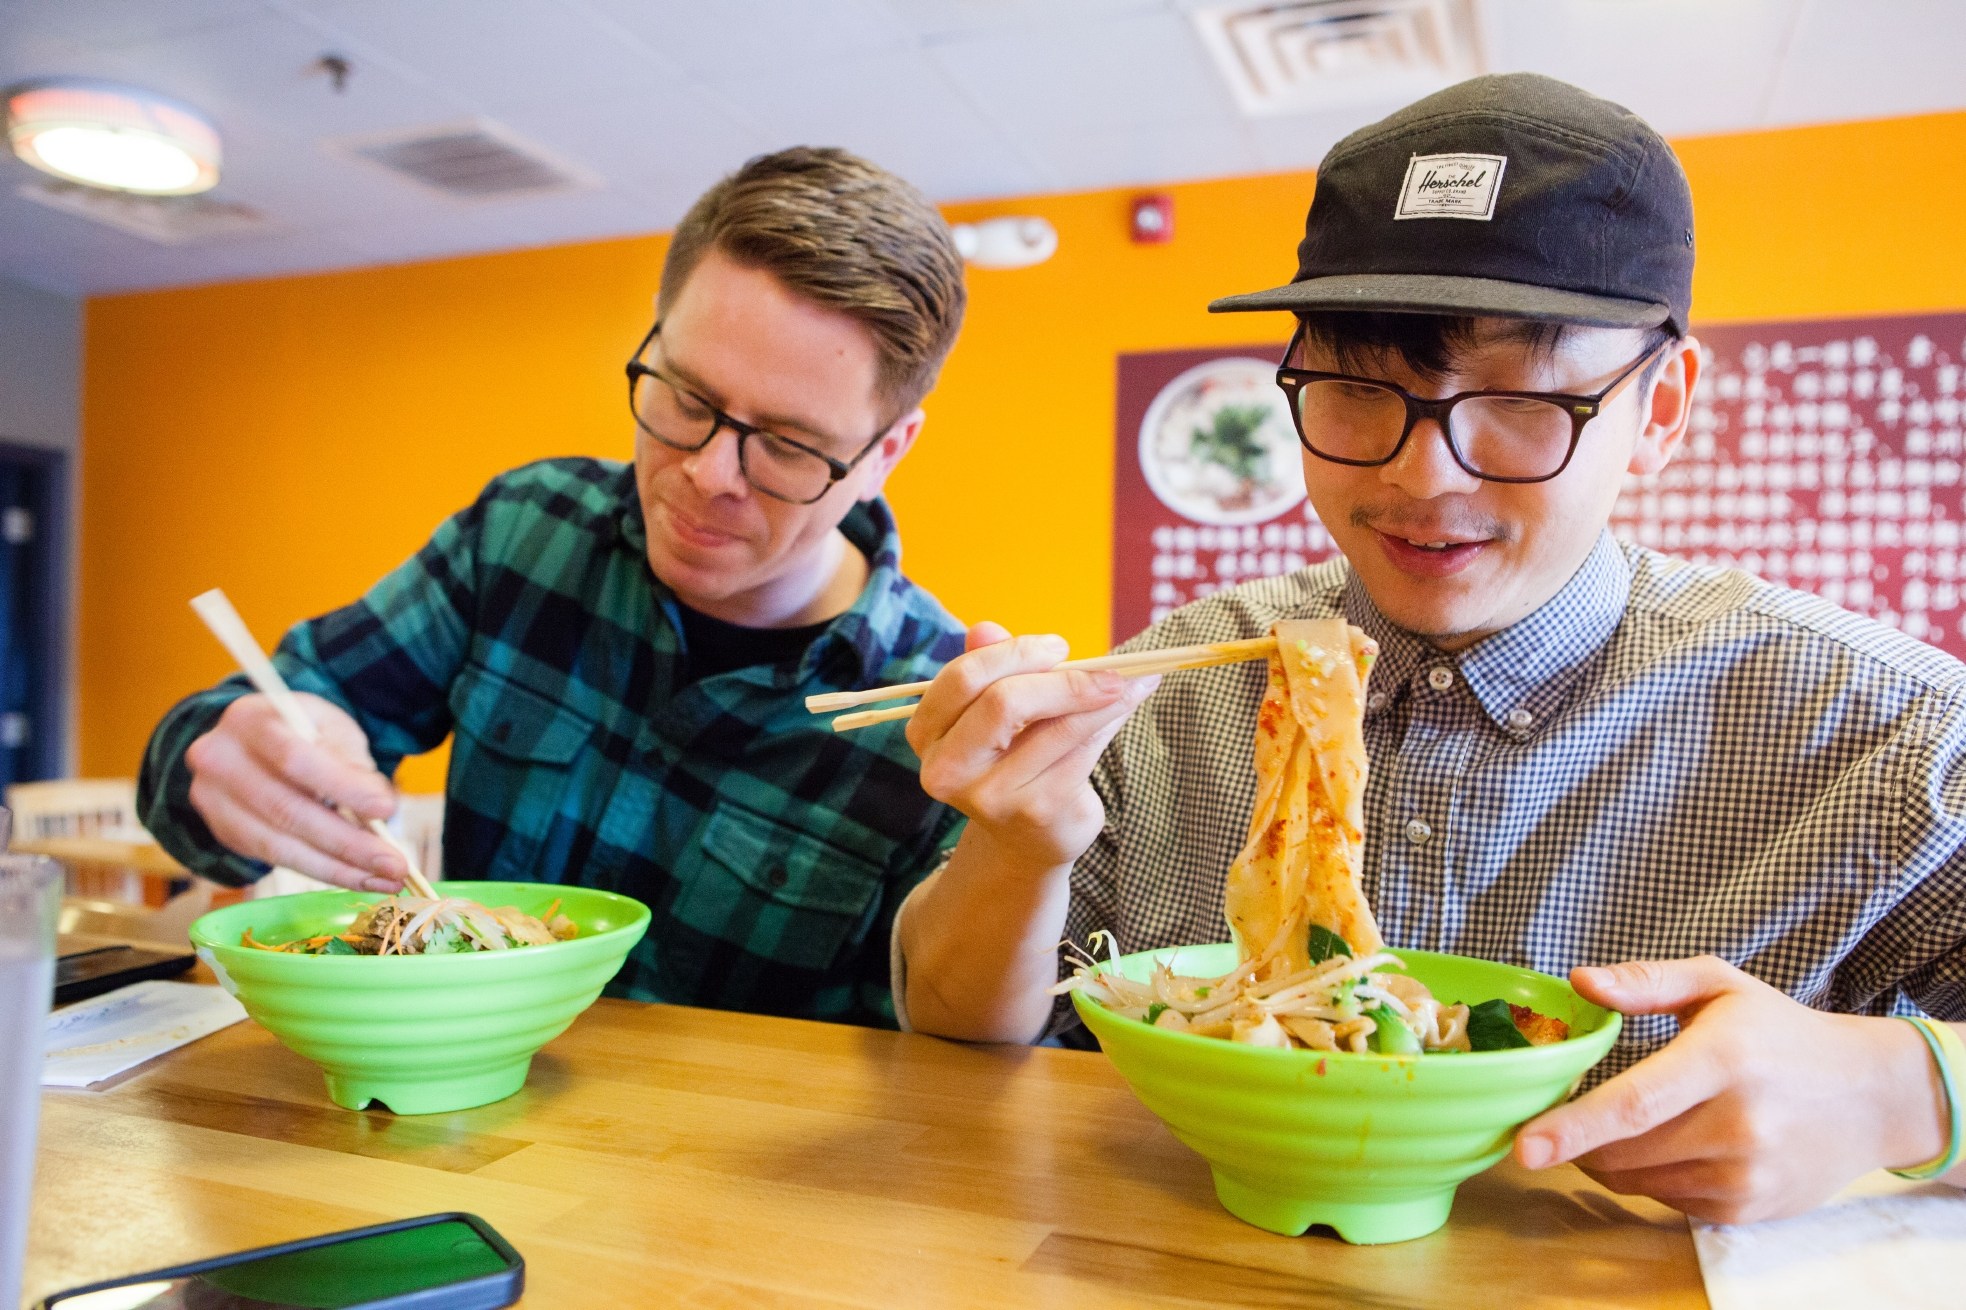 Associate editor Tim Chin and test cook Sasha Marx sample hand-pulled noodle dishes at MDM Noodles in Brighton, MA as they do research for a new recipe featuring this uniquely prepared food.